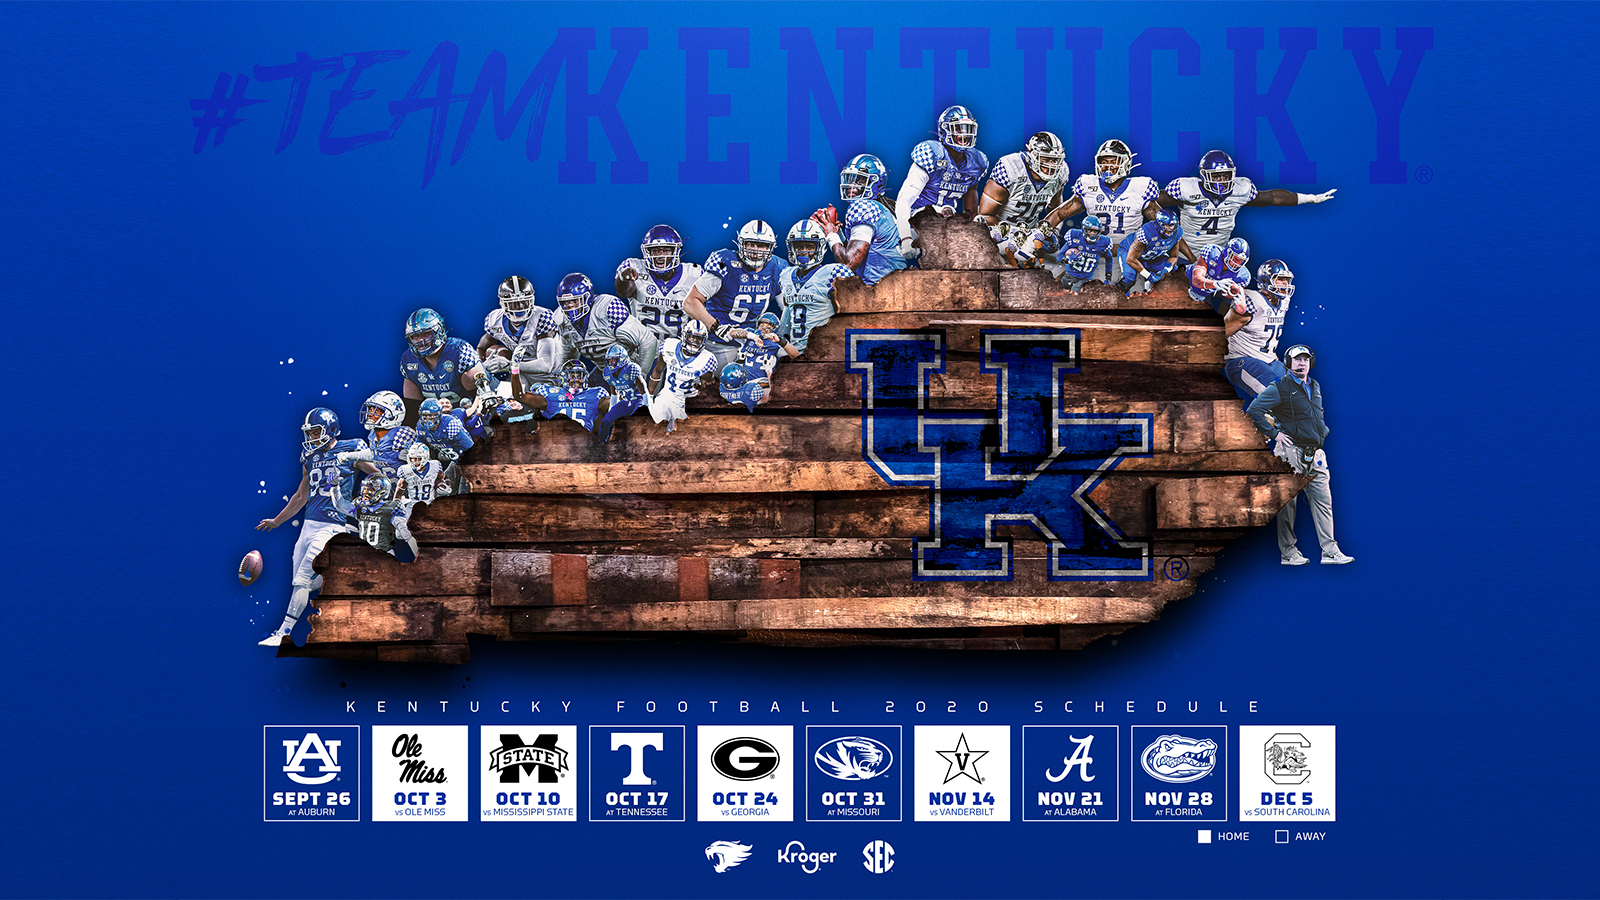 Kentucky Schedule Posters, Presented by Kroger, Unveiled